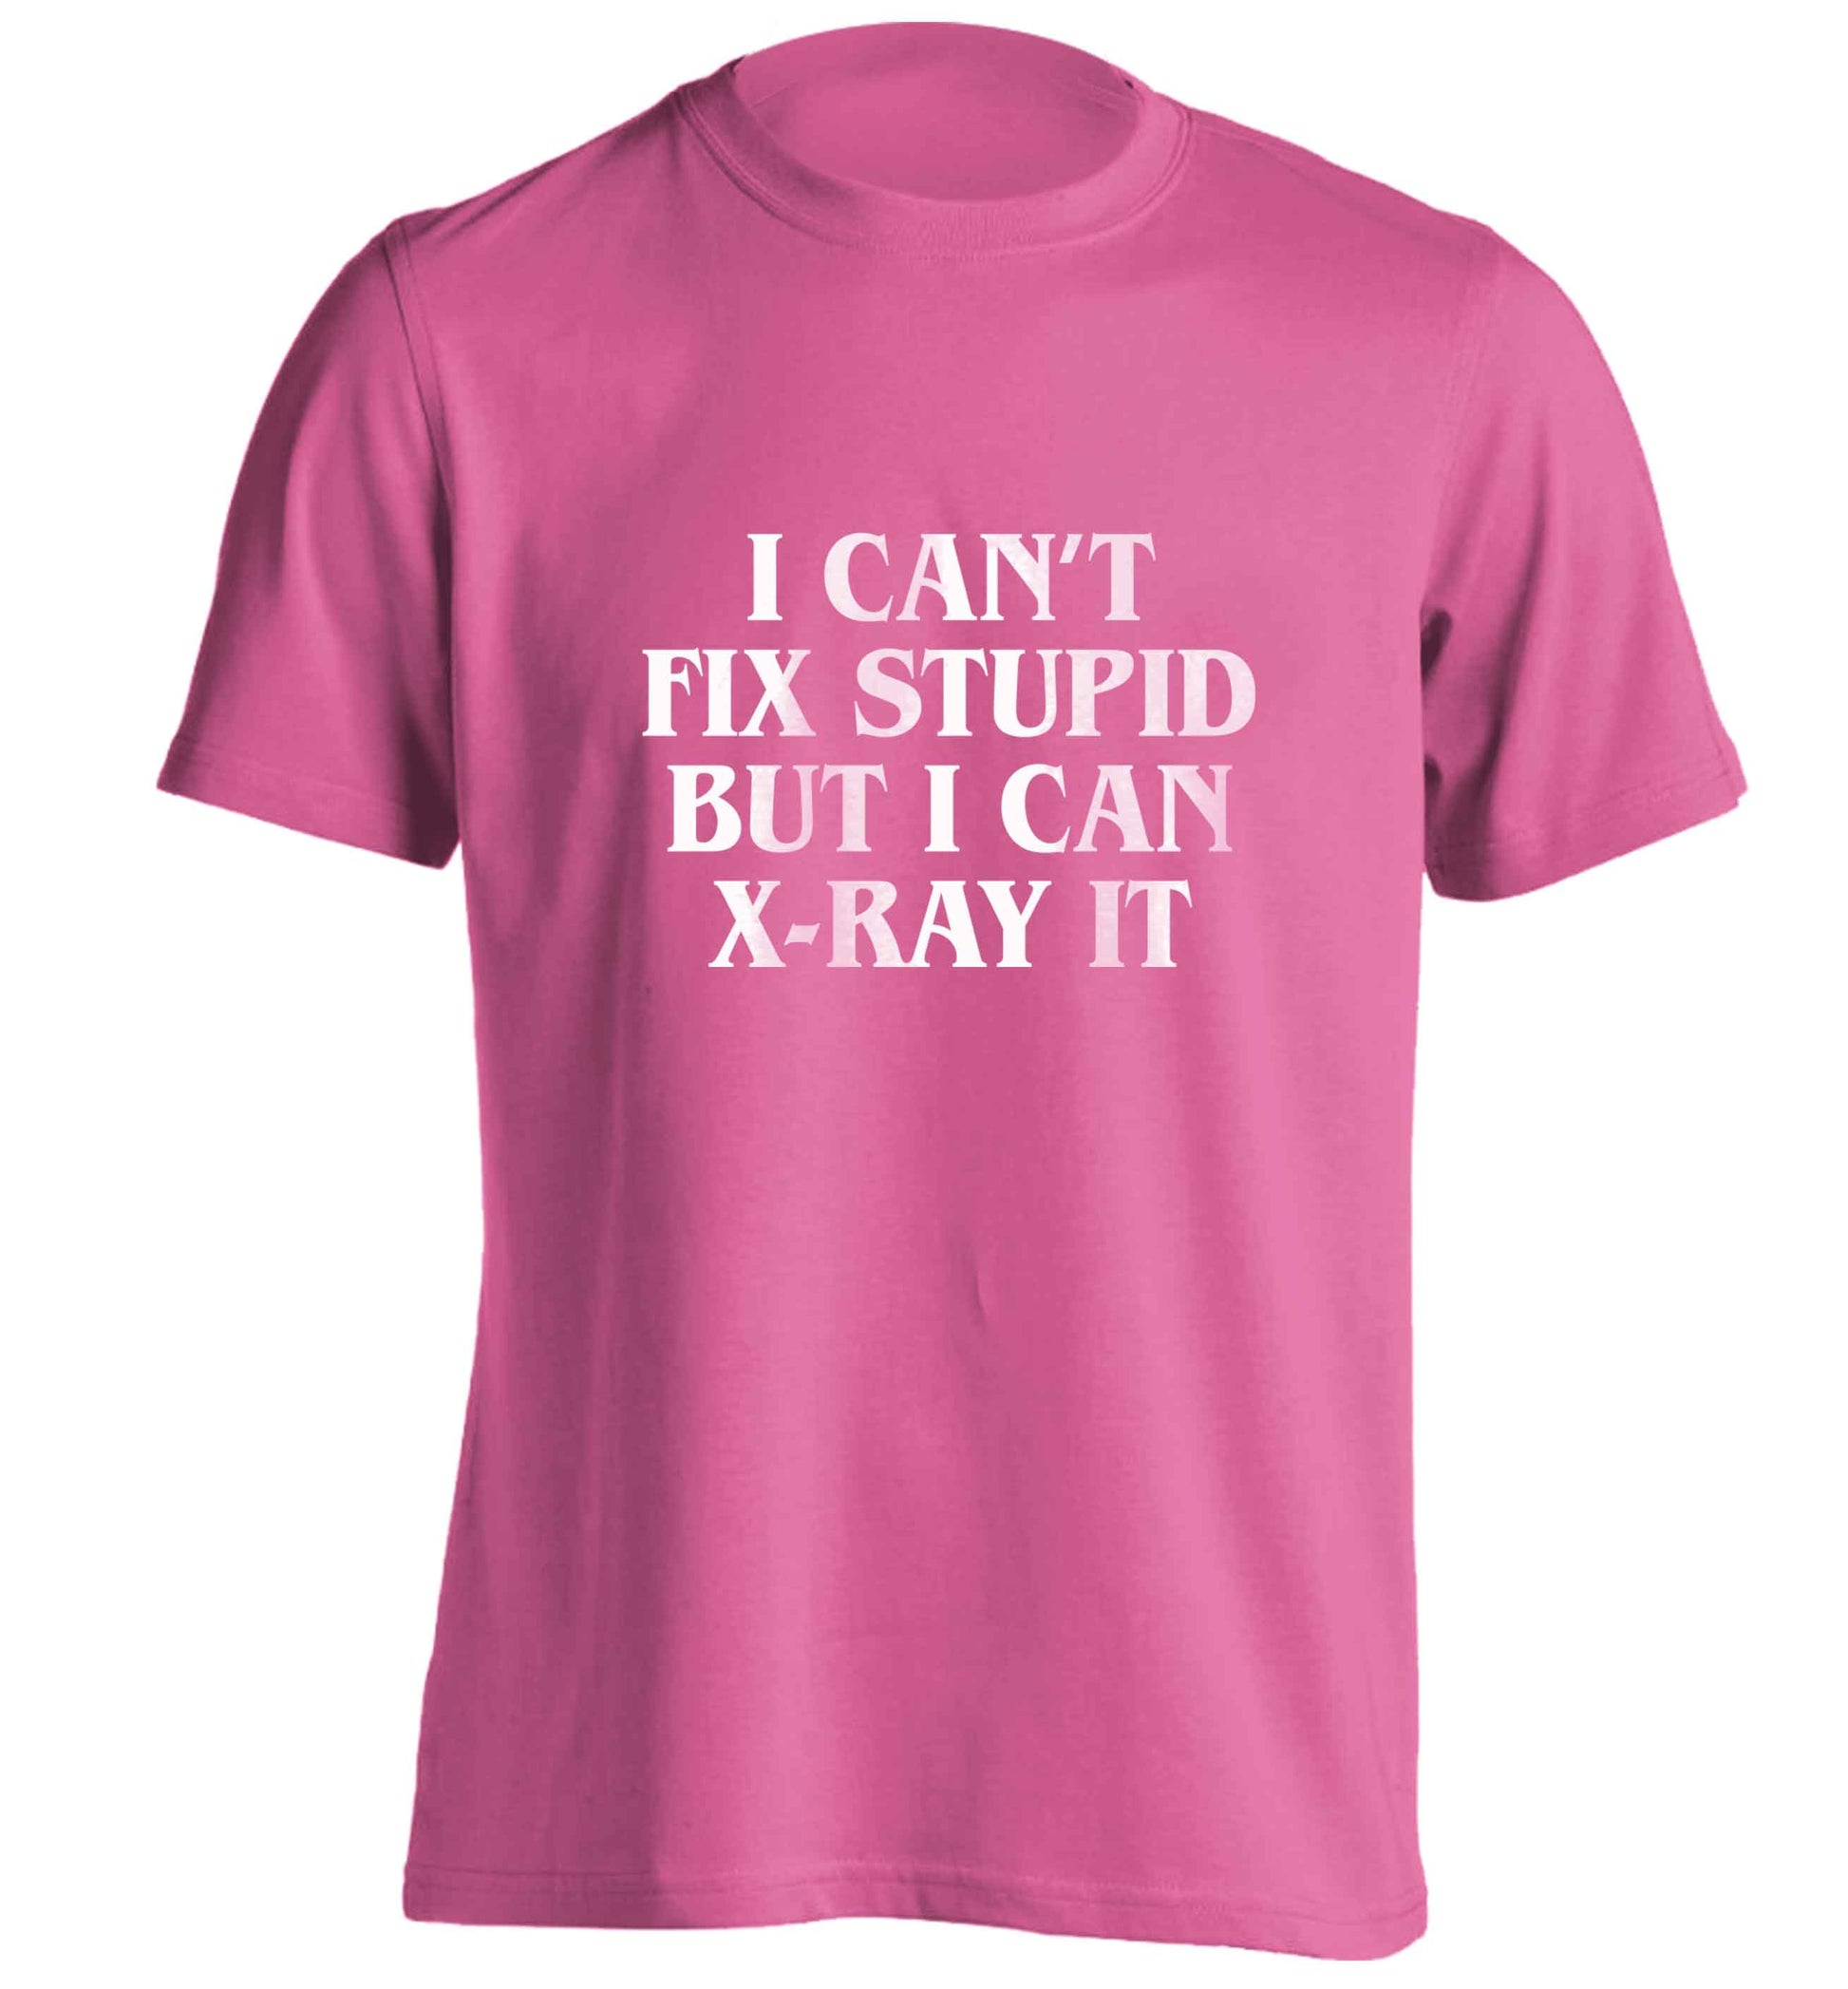 I can't fix stupid but I can X-Ray it adults unisex pink Tshirt 2XL